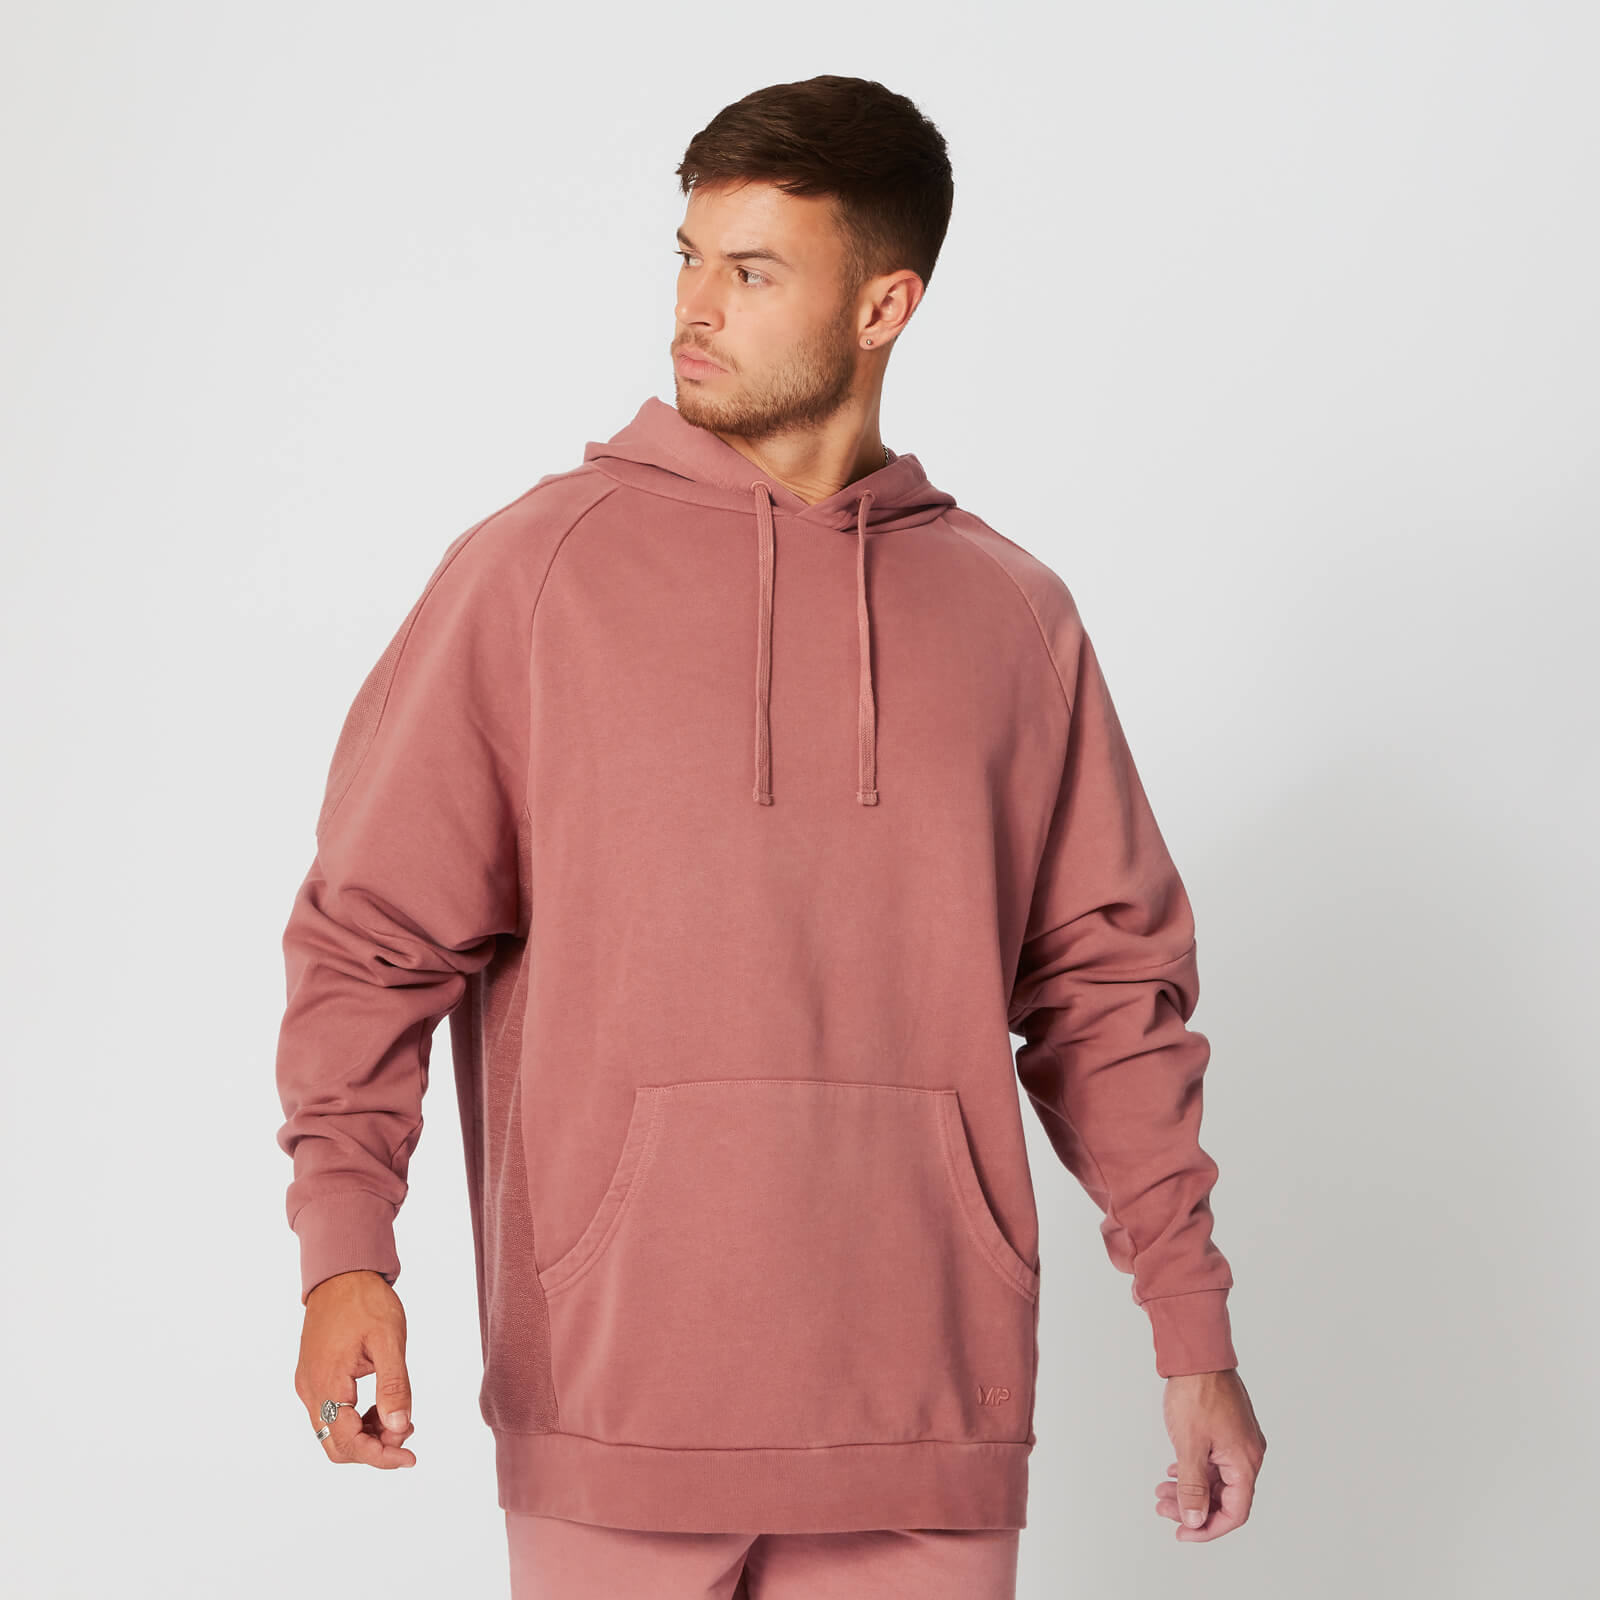 MP Washed Pullover Hoodie - Russet - XS